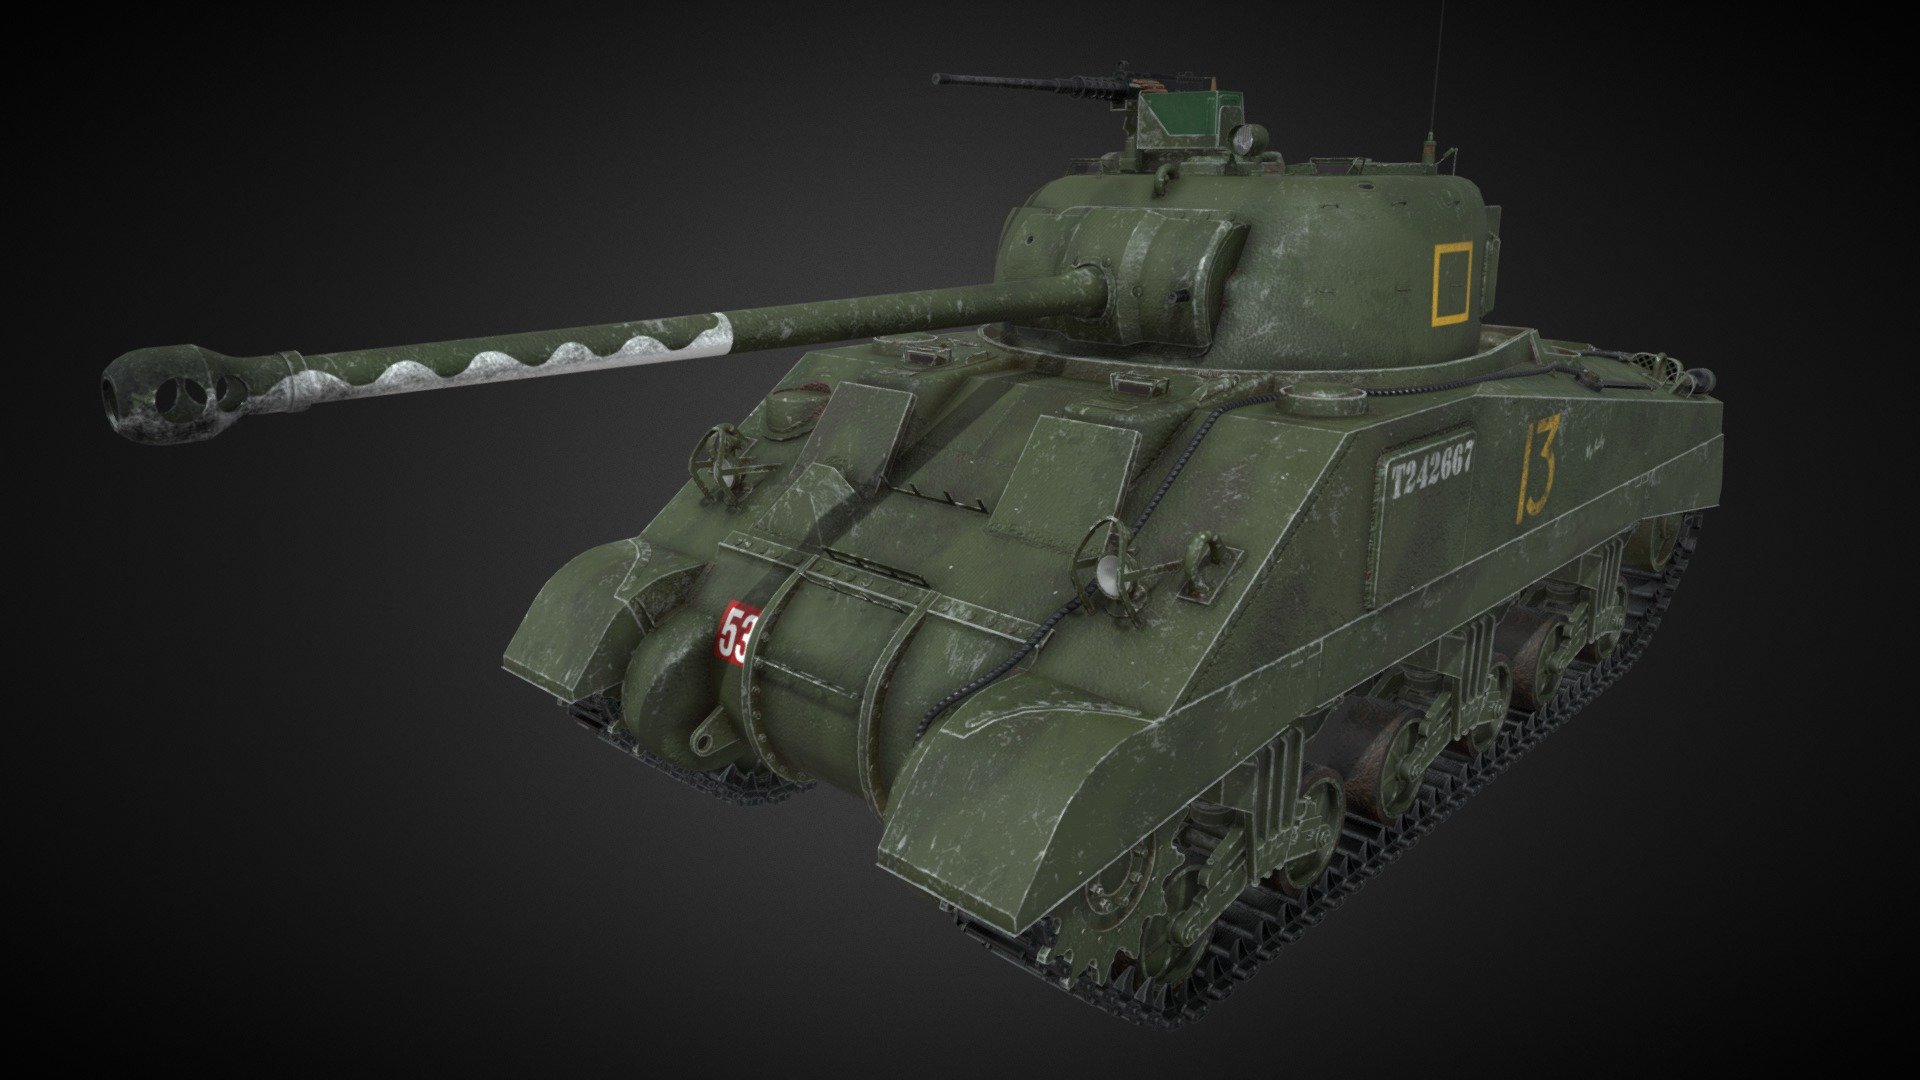 The Sherman Firefly is a British World War II medium tank based on the American M4 Sherman tank.
More information about the model will be available on ArtStation soon. (I hope so XD) - M4 Sherman Firefly - 3D model by barking_dogo 3d model